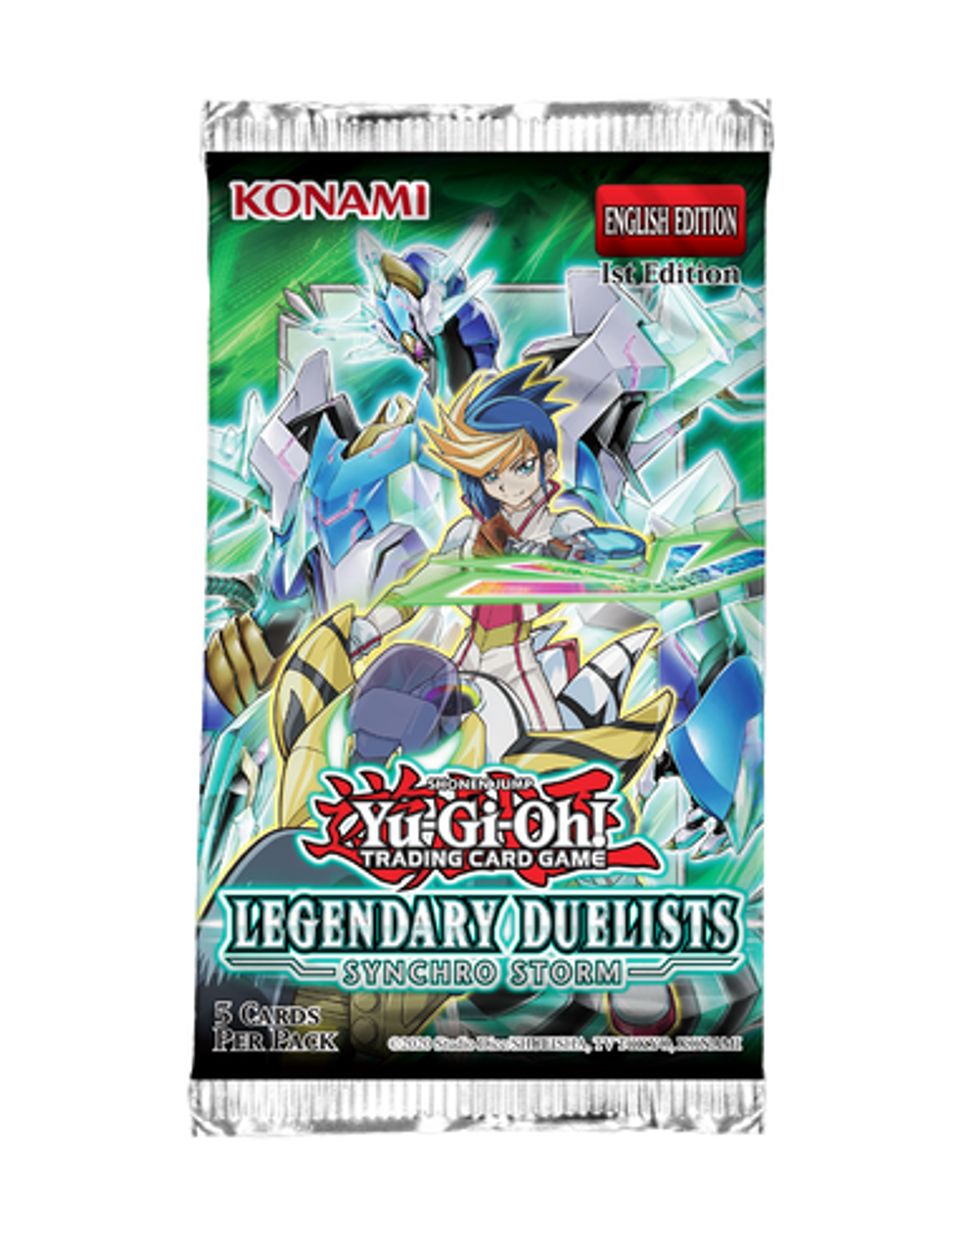 Pret mic Yu-Gi-Oh! Legendary Duelists 8 Synchro Storm Booster Pack